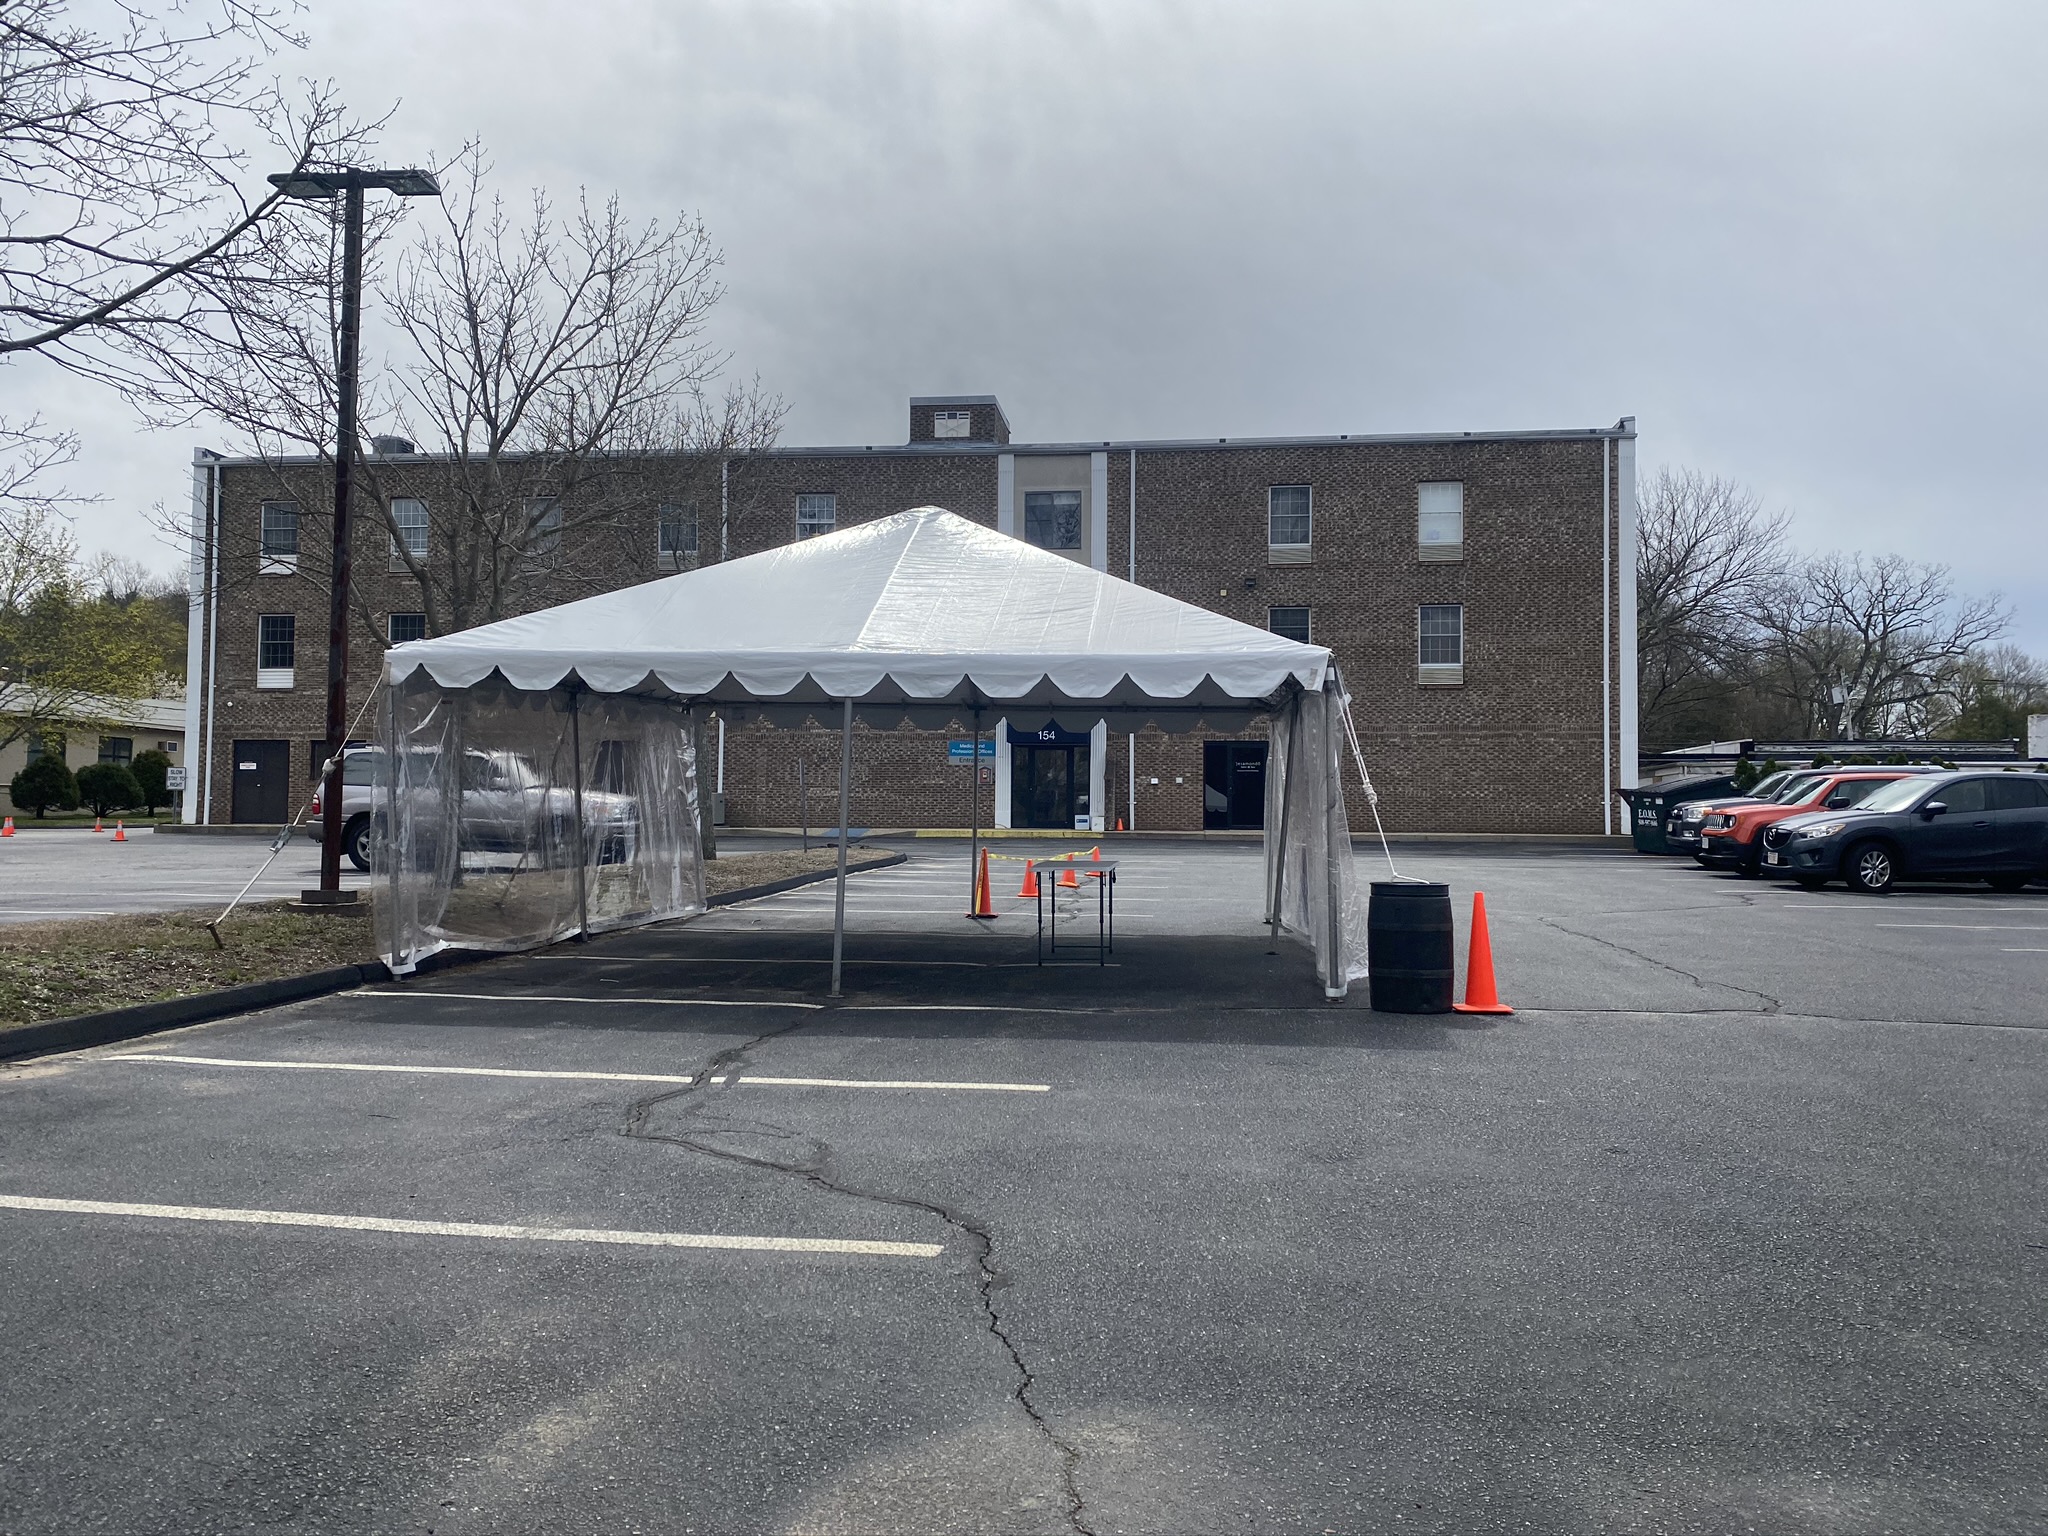 Dr. Raynham secured a permit from the local Department of Public Health to set up a ‘drive-thru’ dermatology clinic with a commercial grade tent in the office parking lot.